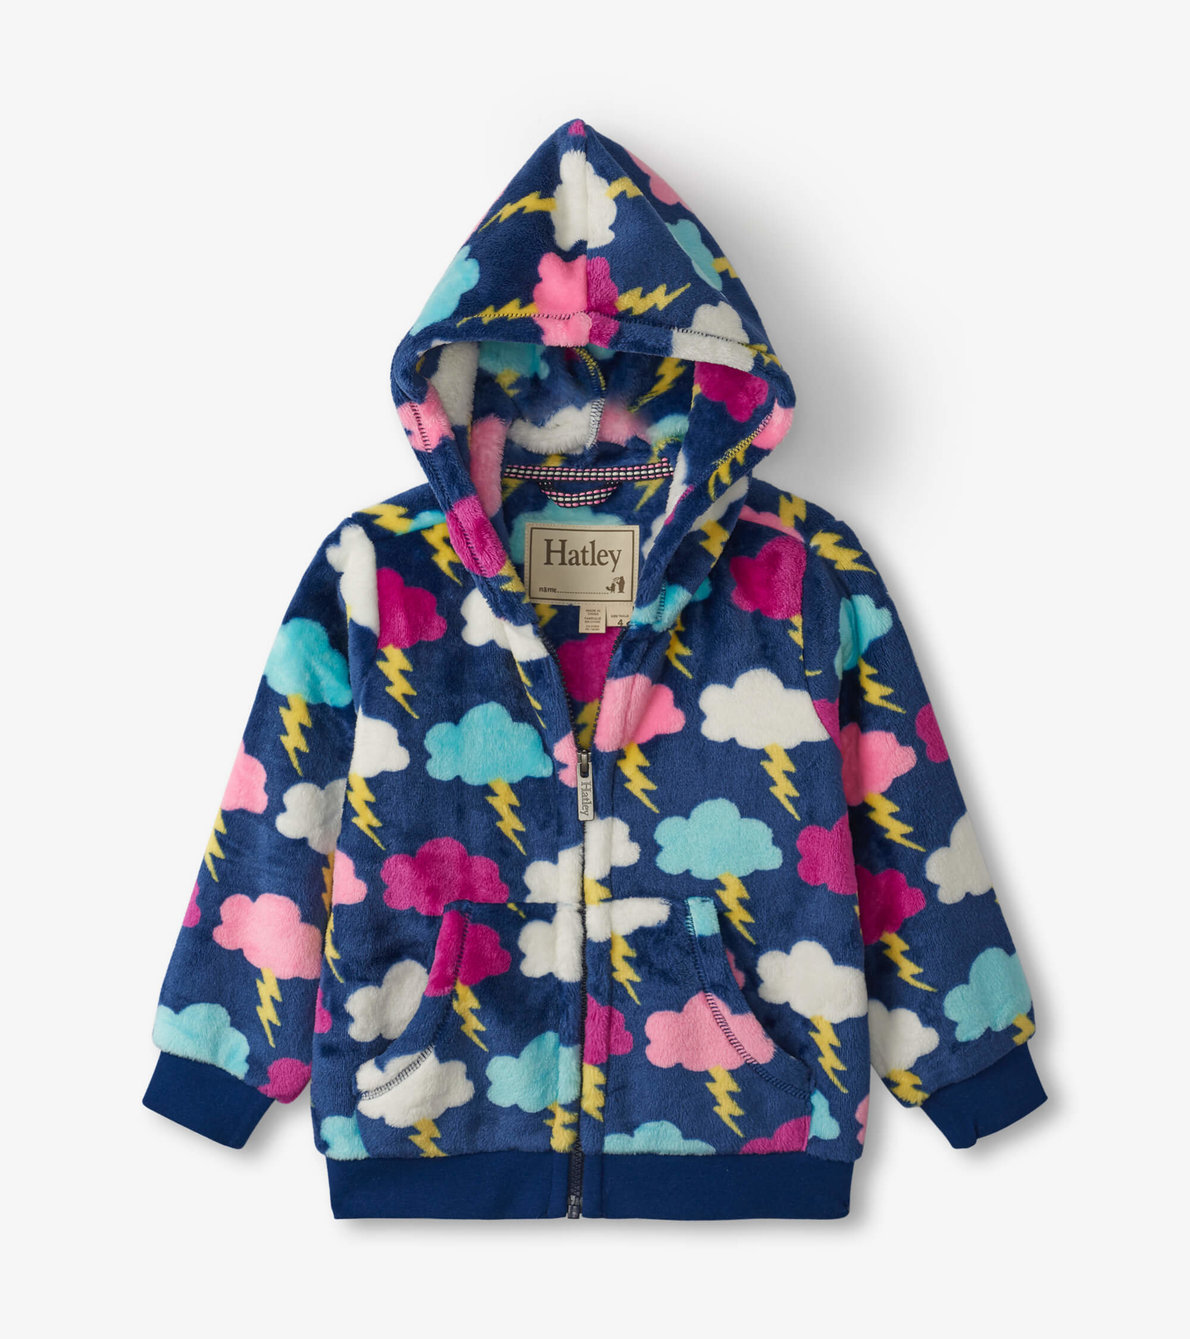 View larger image of Electric Clouds Fuzzy Fleece Hooded Jacket